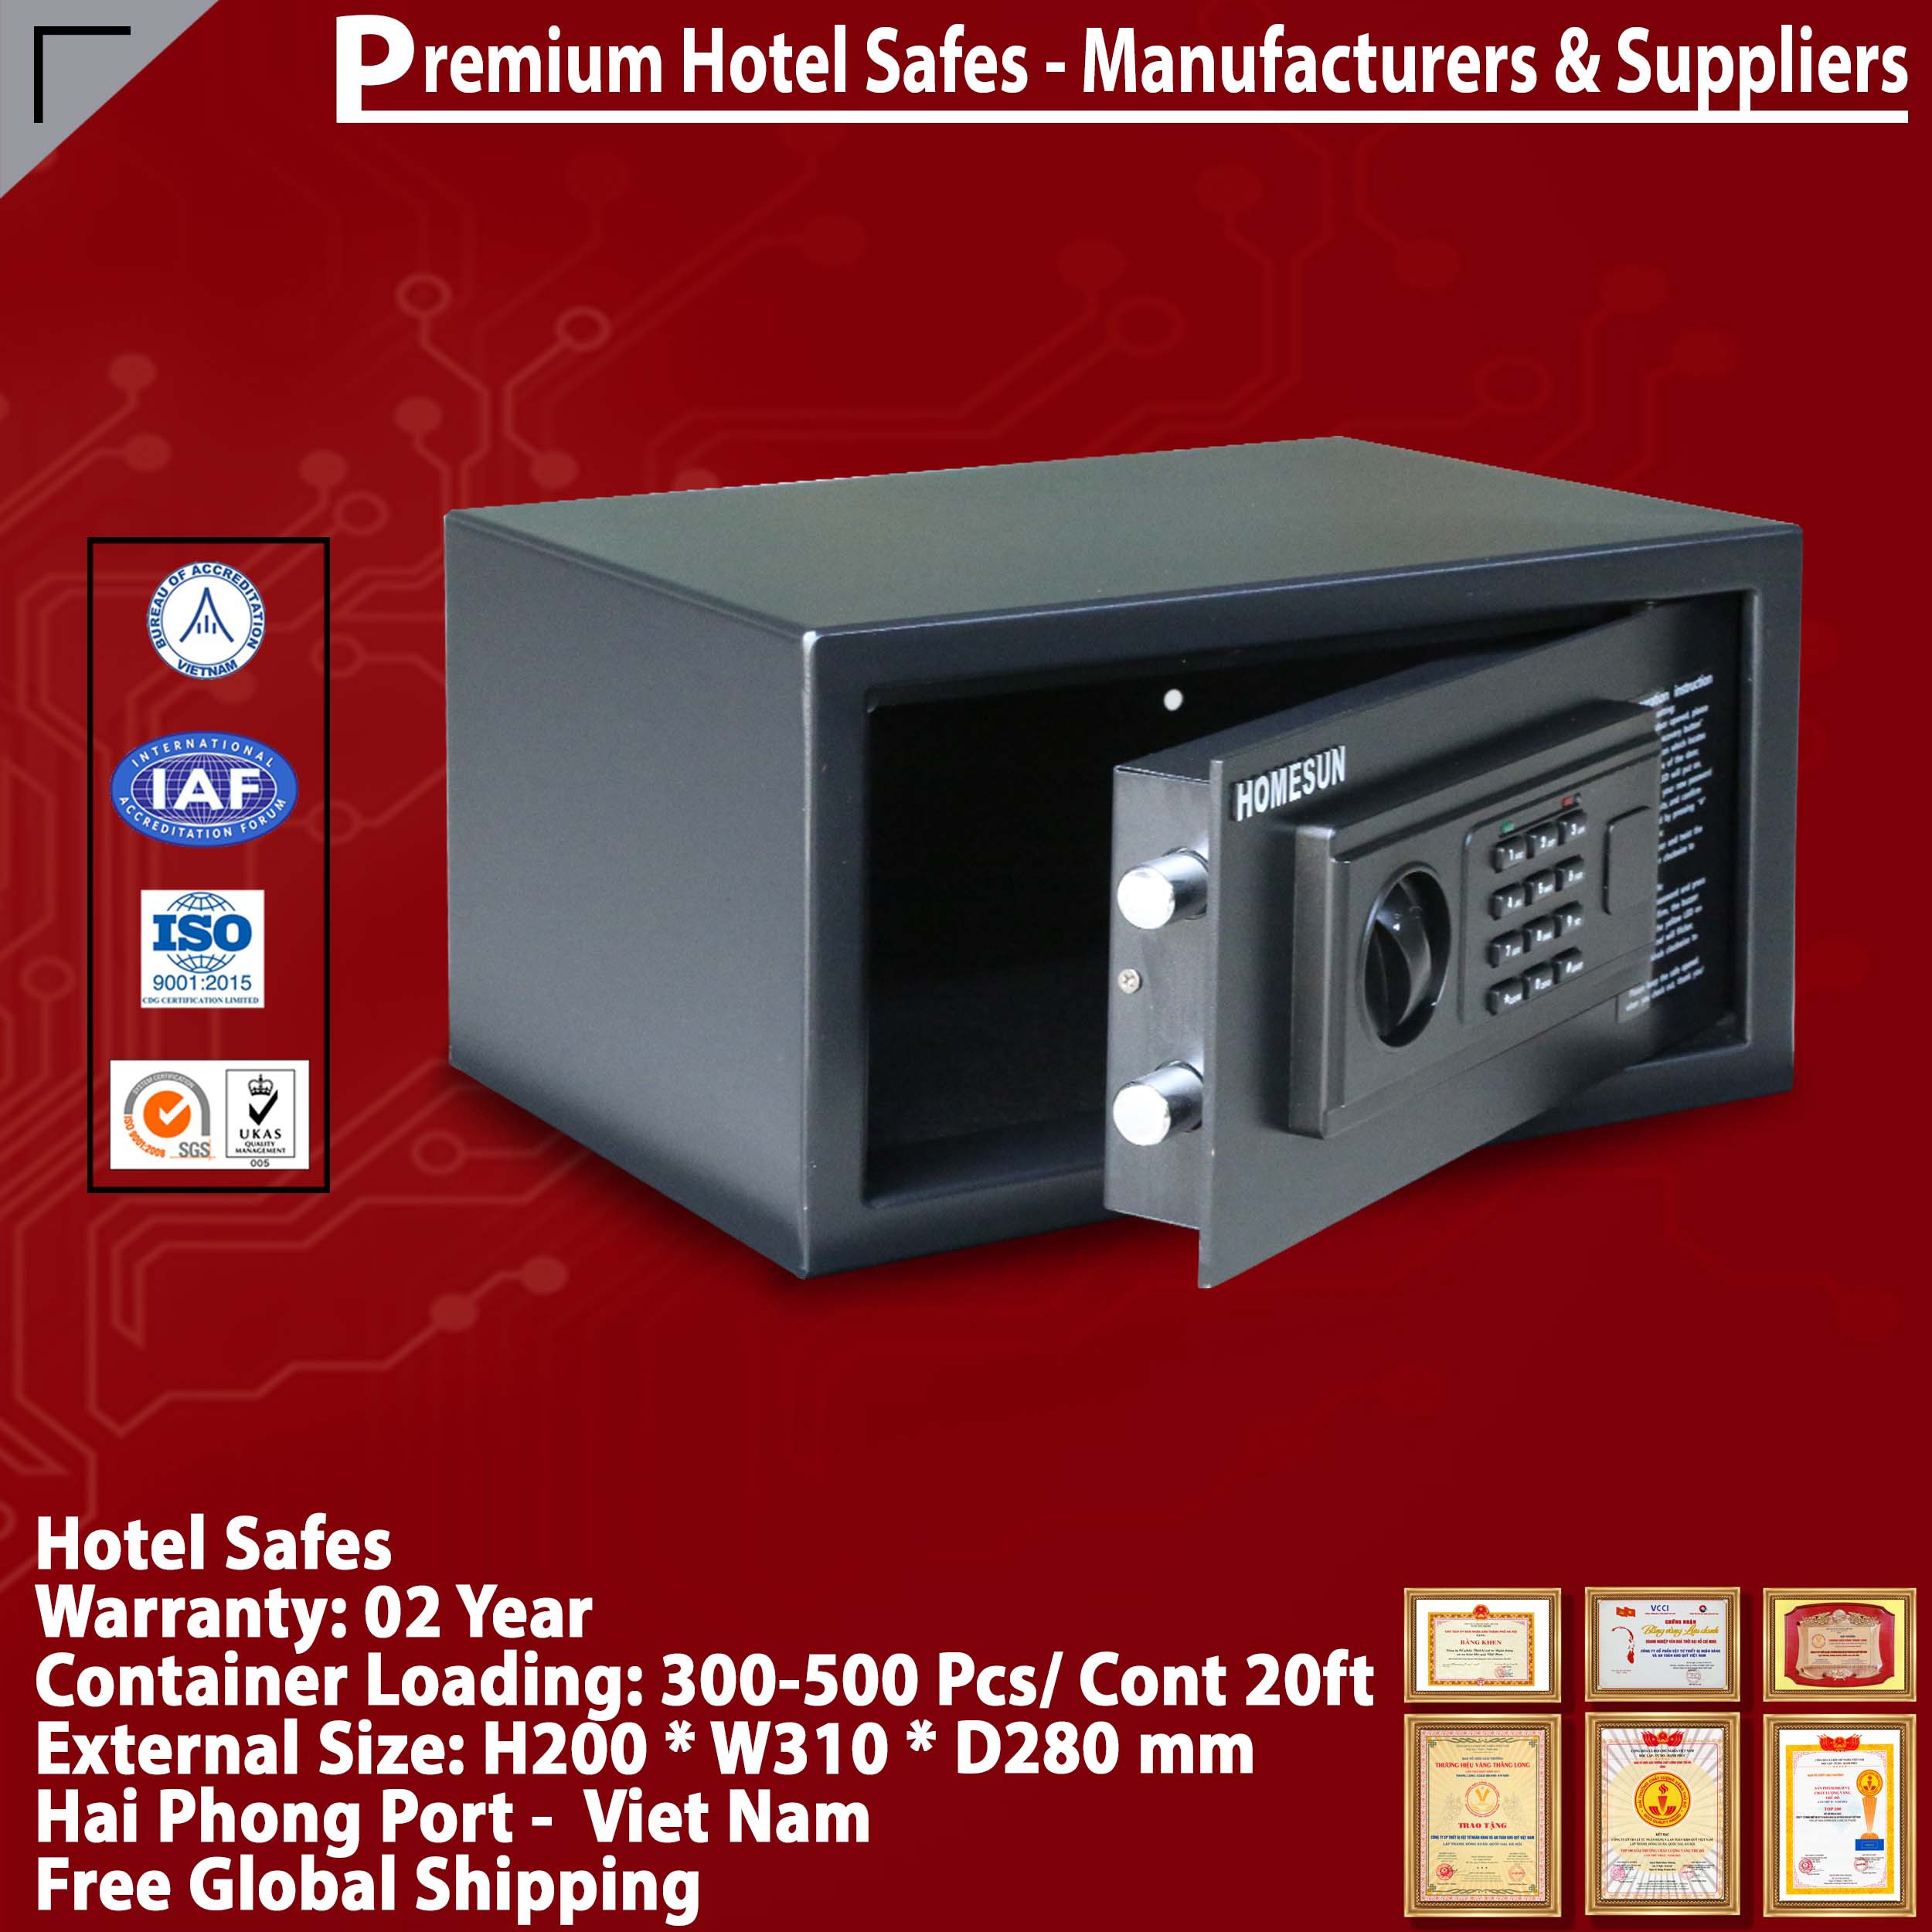 Best Sellers In Hotel Safes High Quality Price Ratio‎ Box